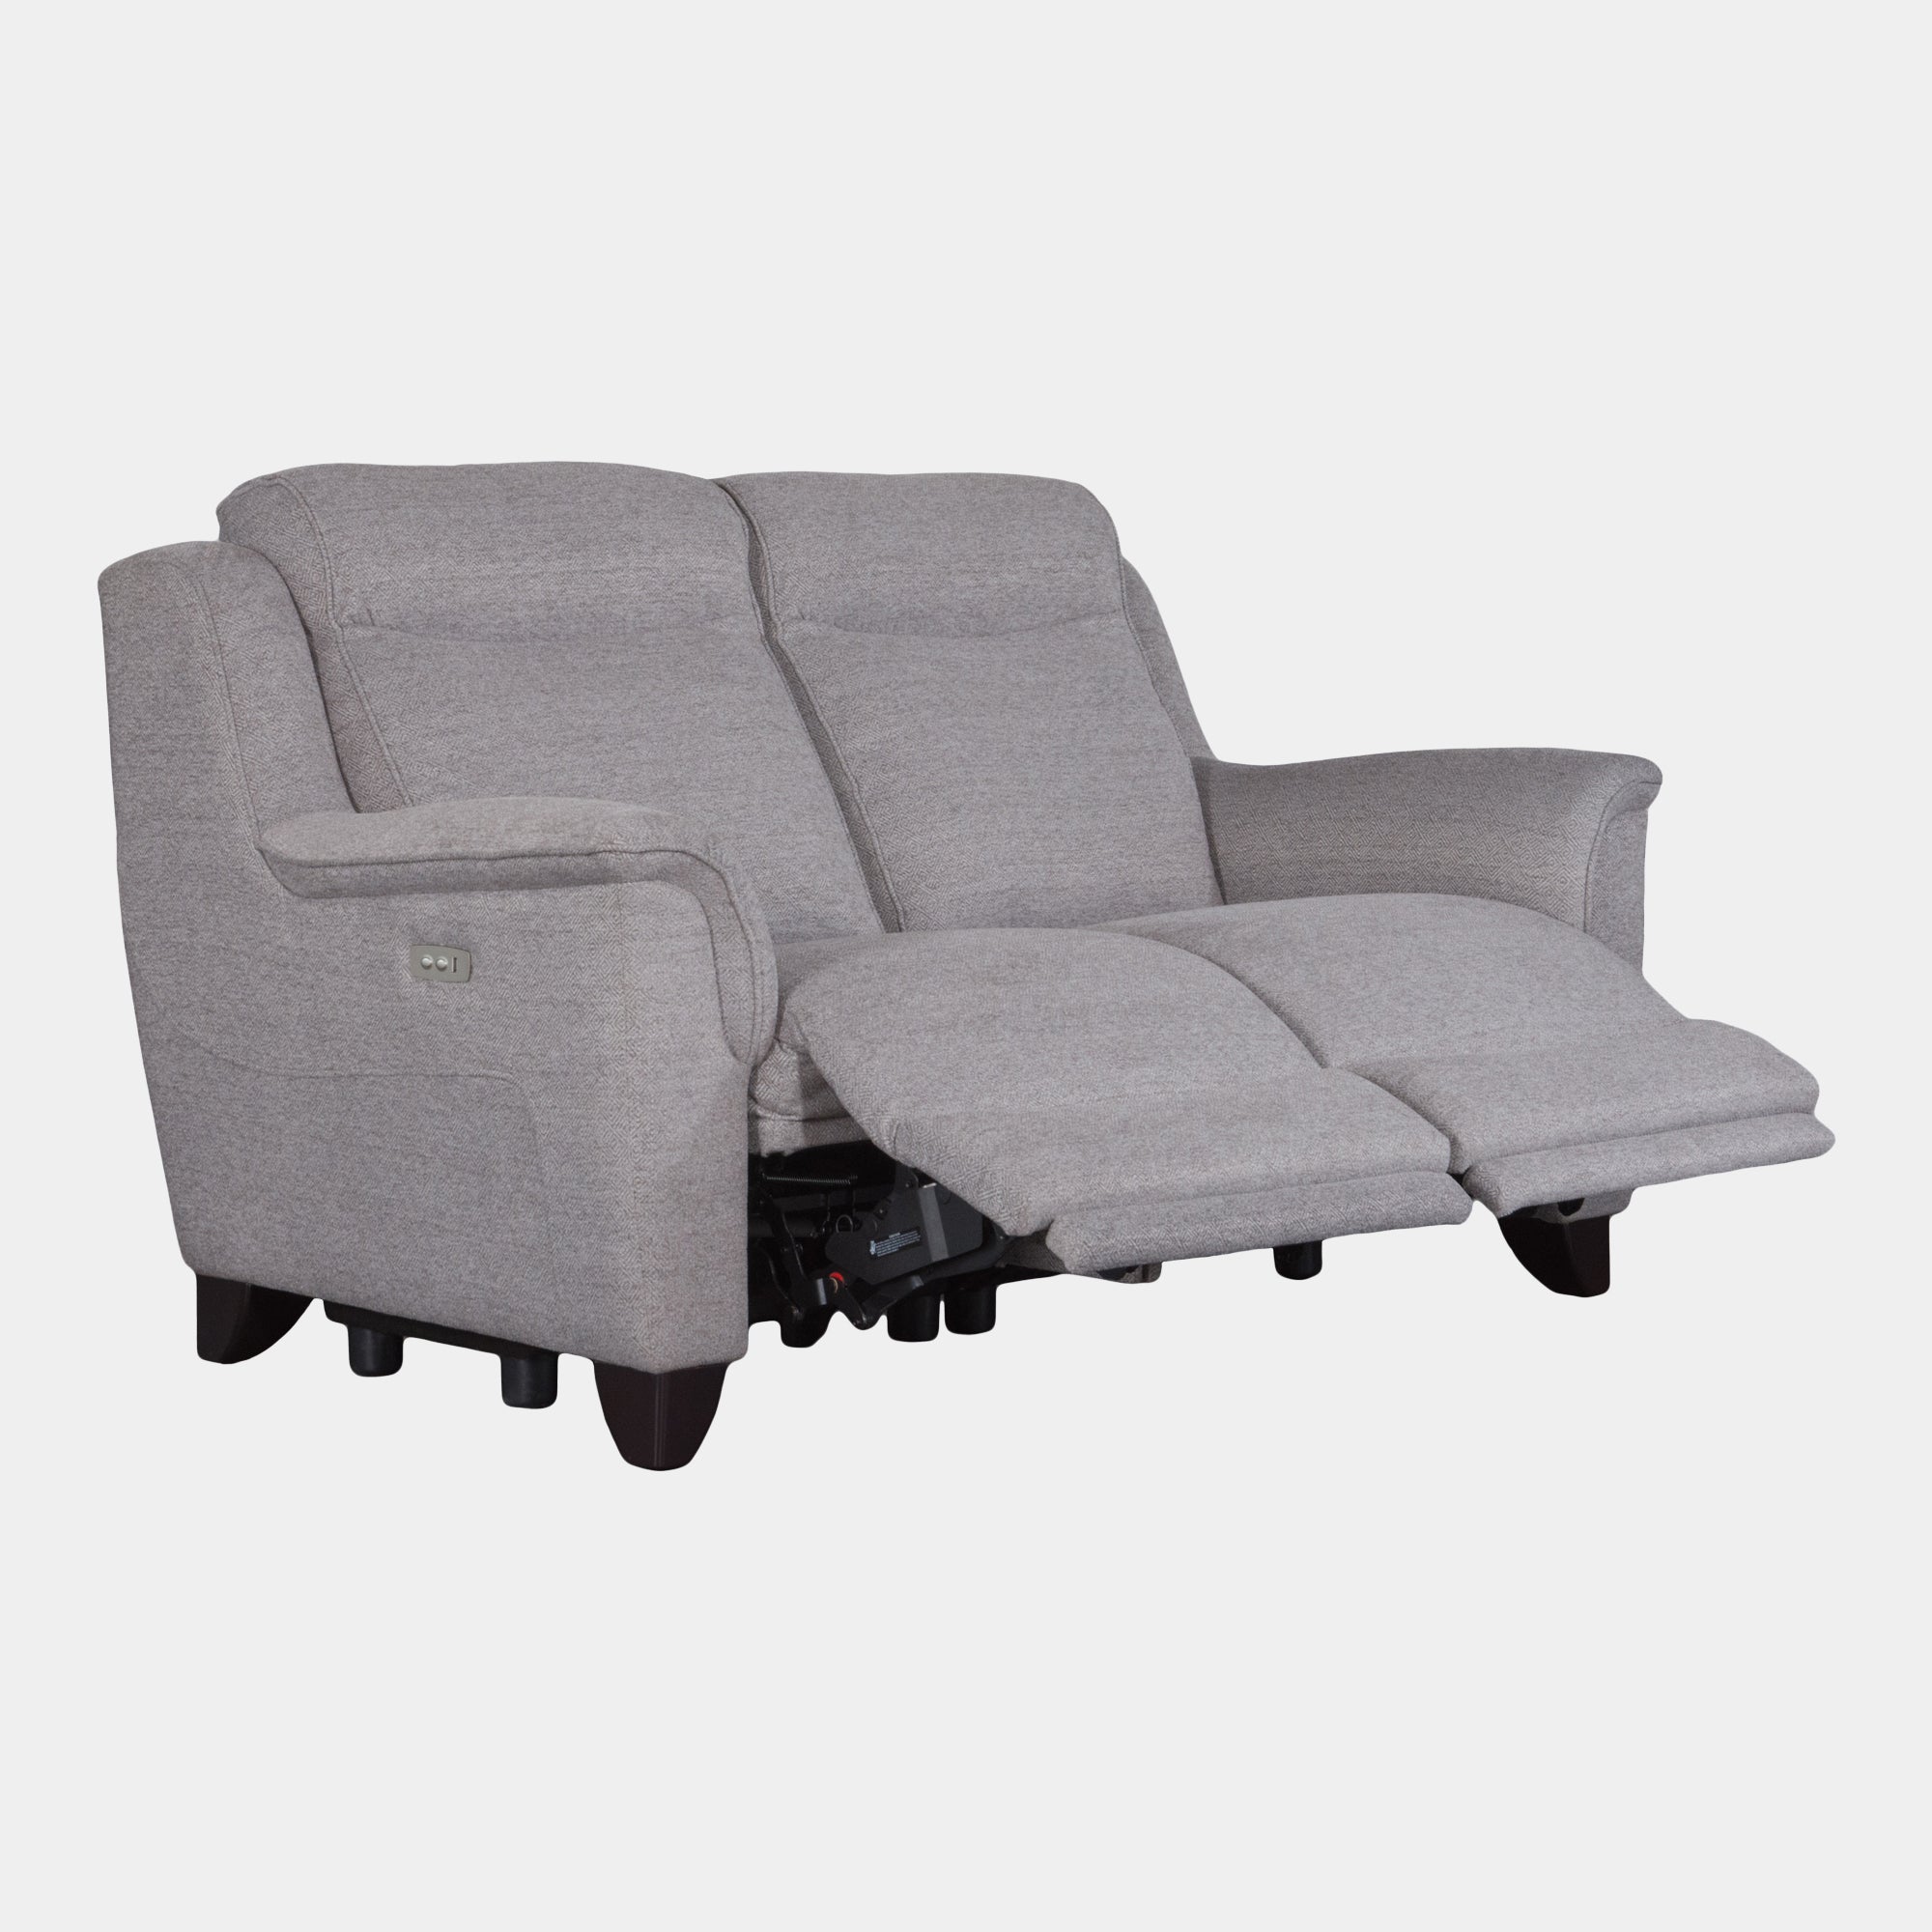 2 Seat Sofa With Double Power Recliners  With 2 Button Switch - Single Motor In Fabric Grade A